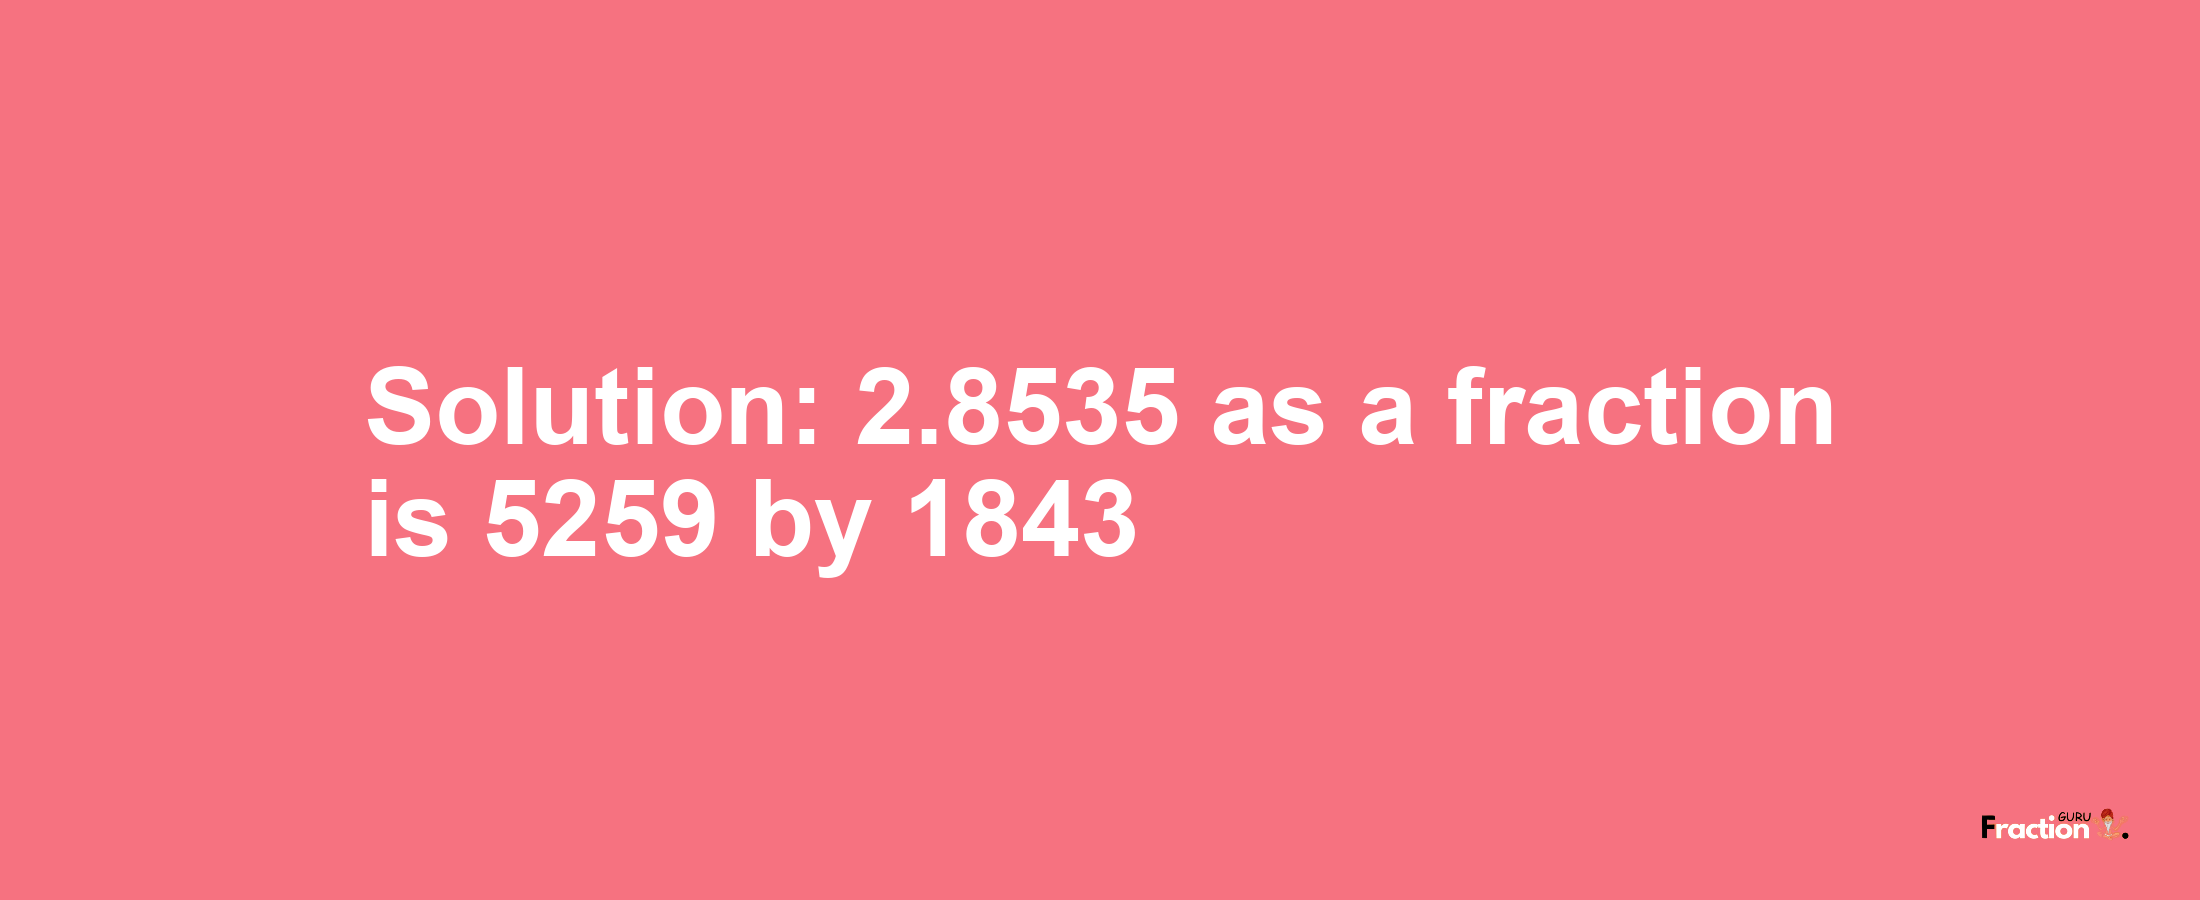 Solution:2.8535 as a fraction is 5259/1843